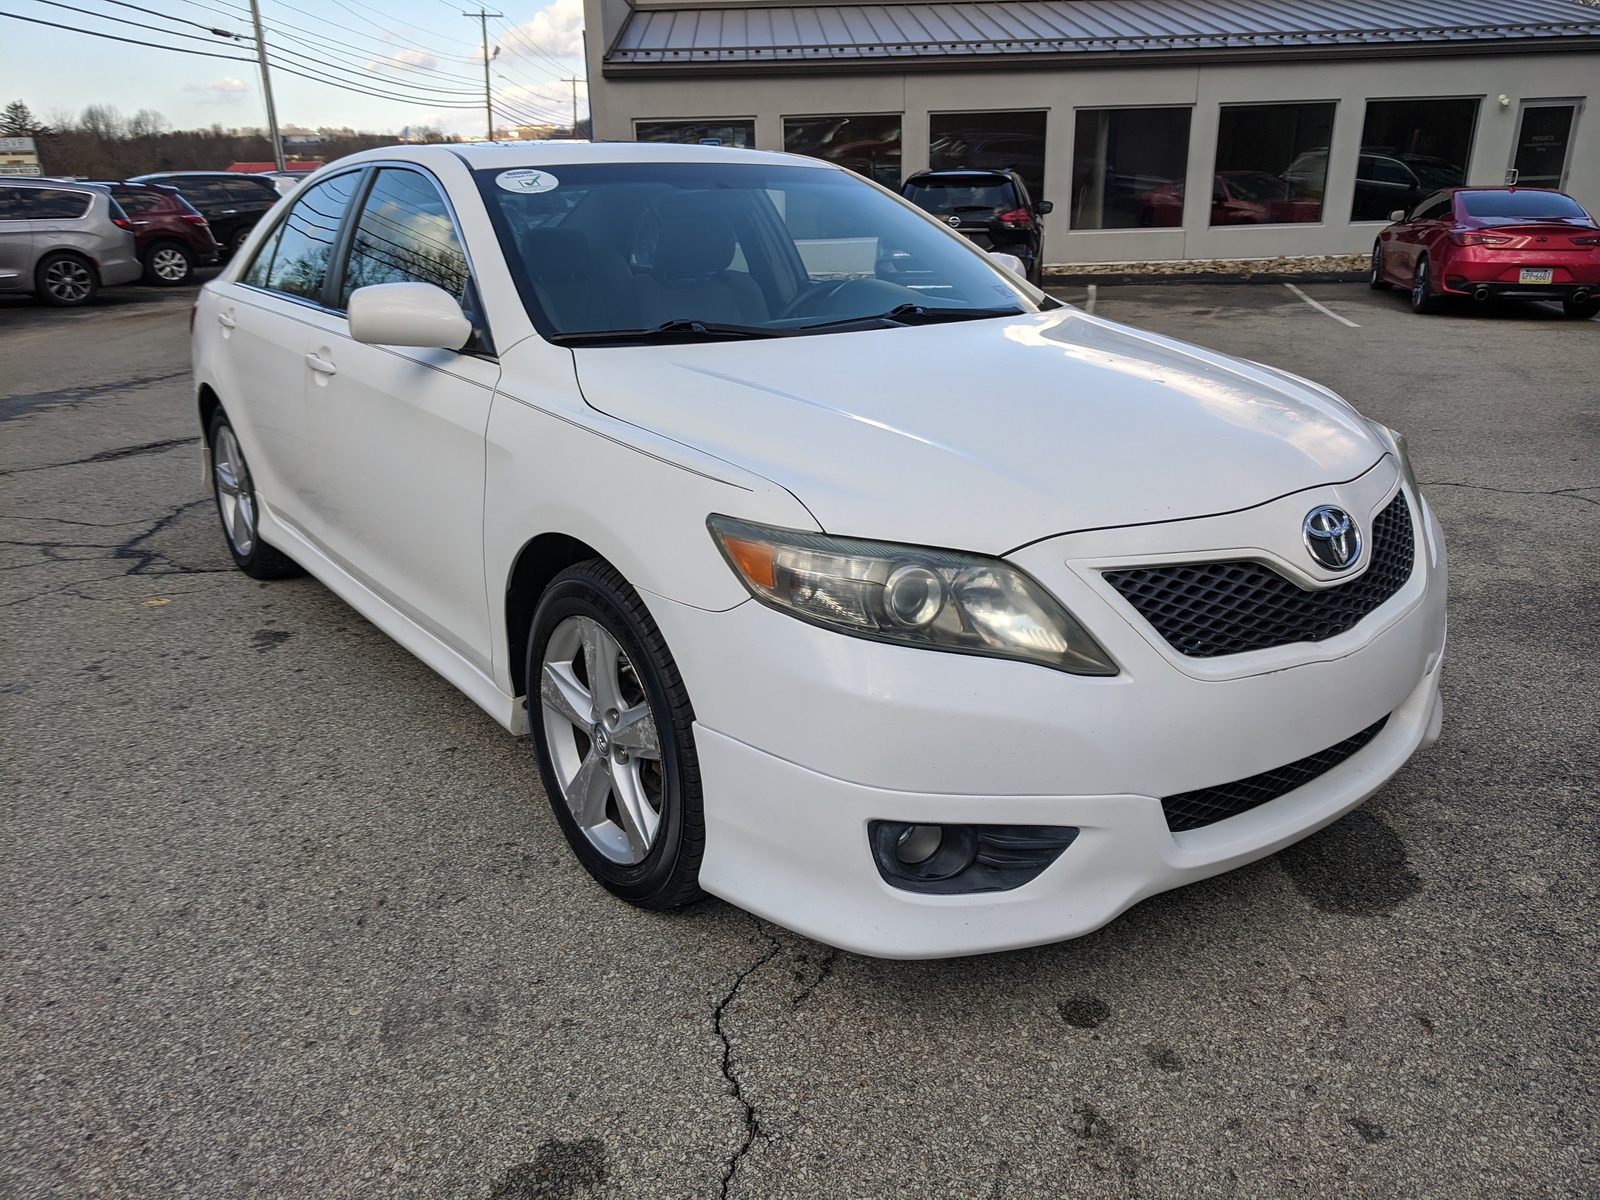 Pre-Owned 2011 Toyota Camry SE in Super White | Greensburg, PA | #F82224Y
